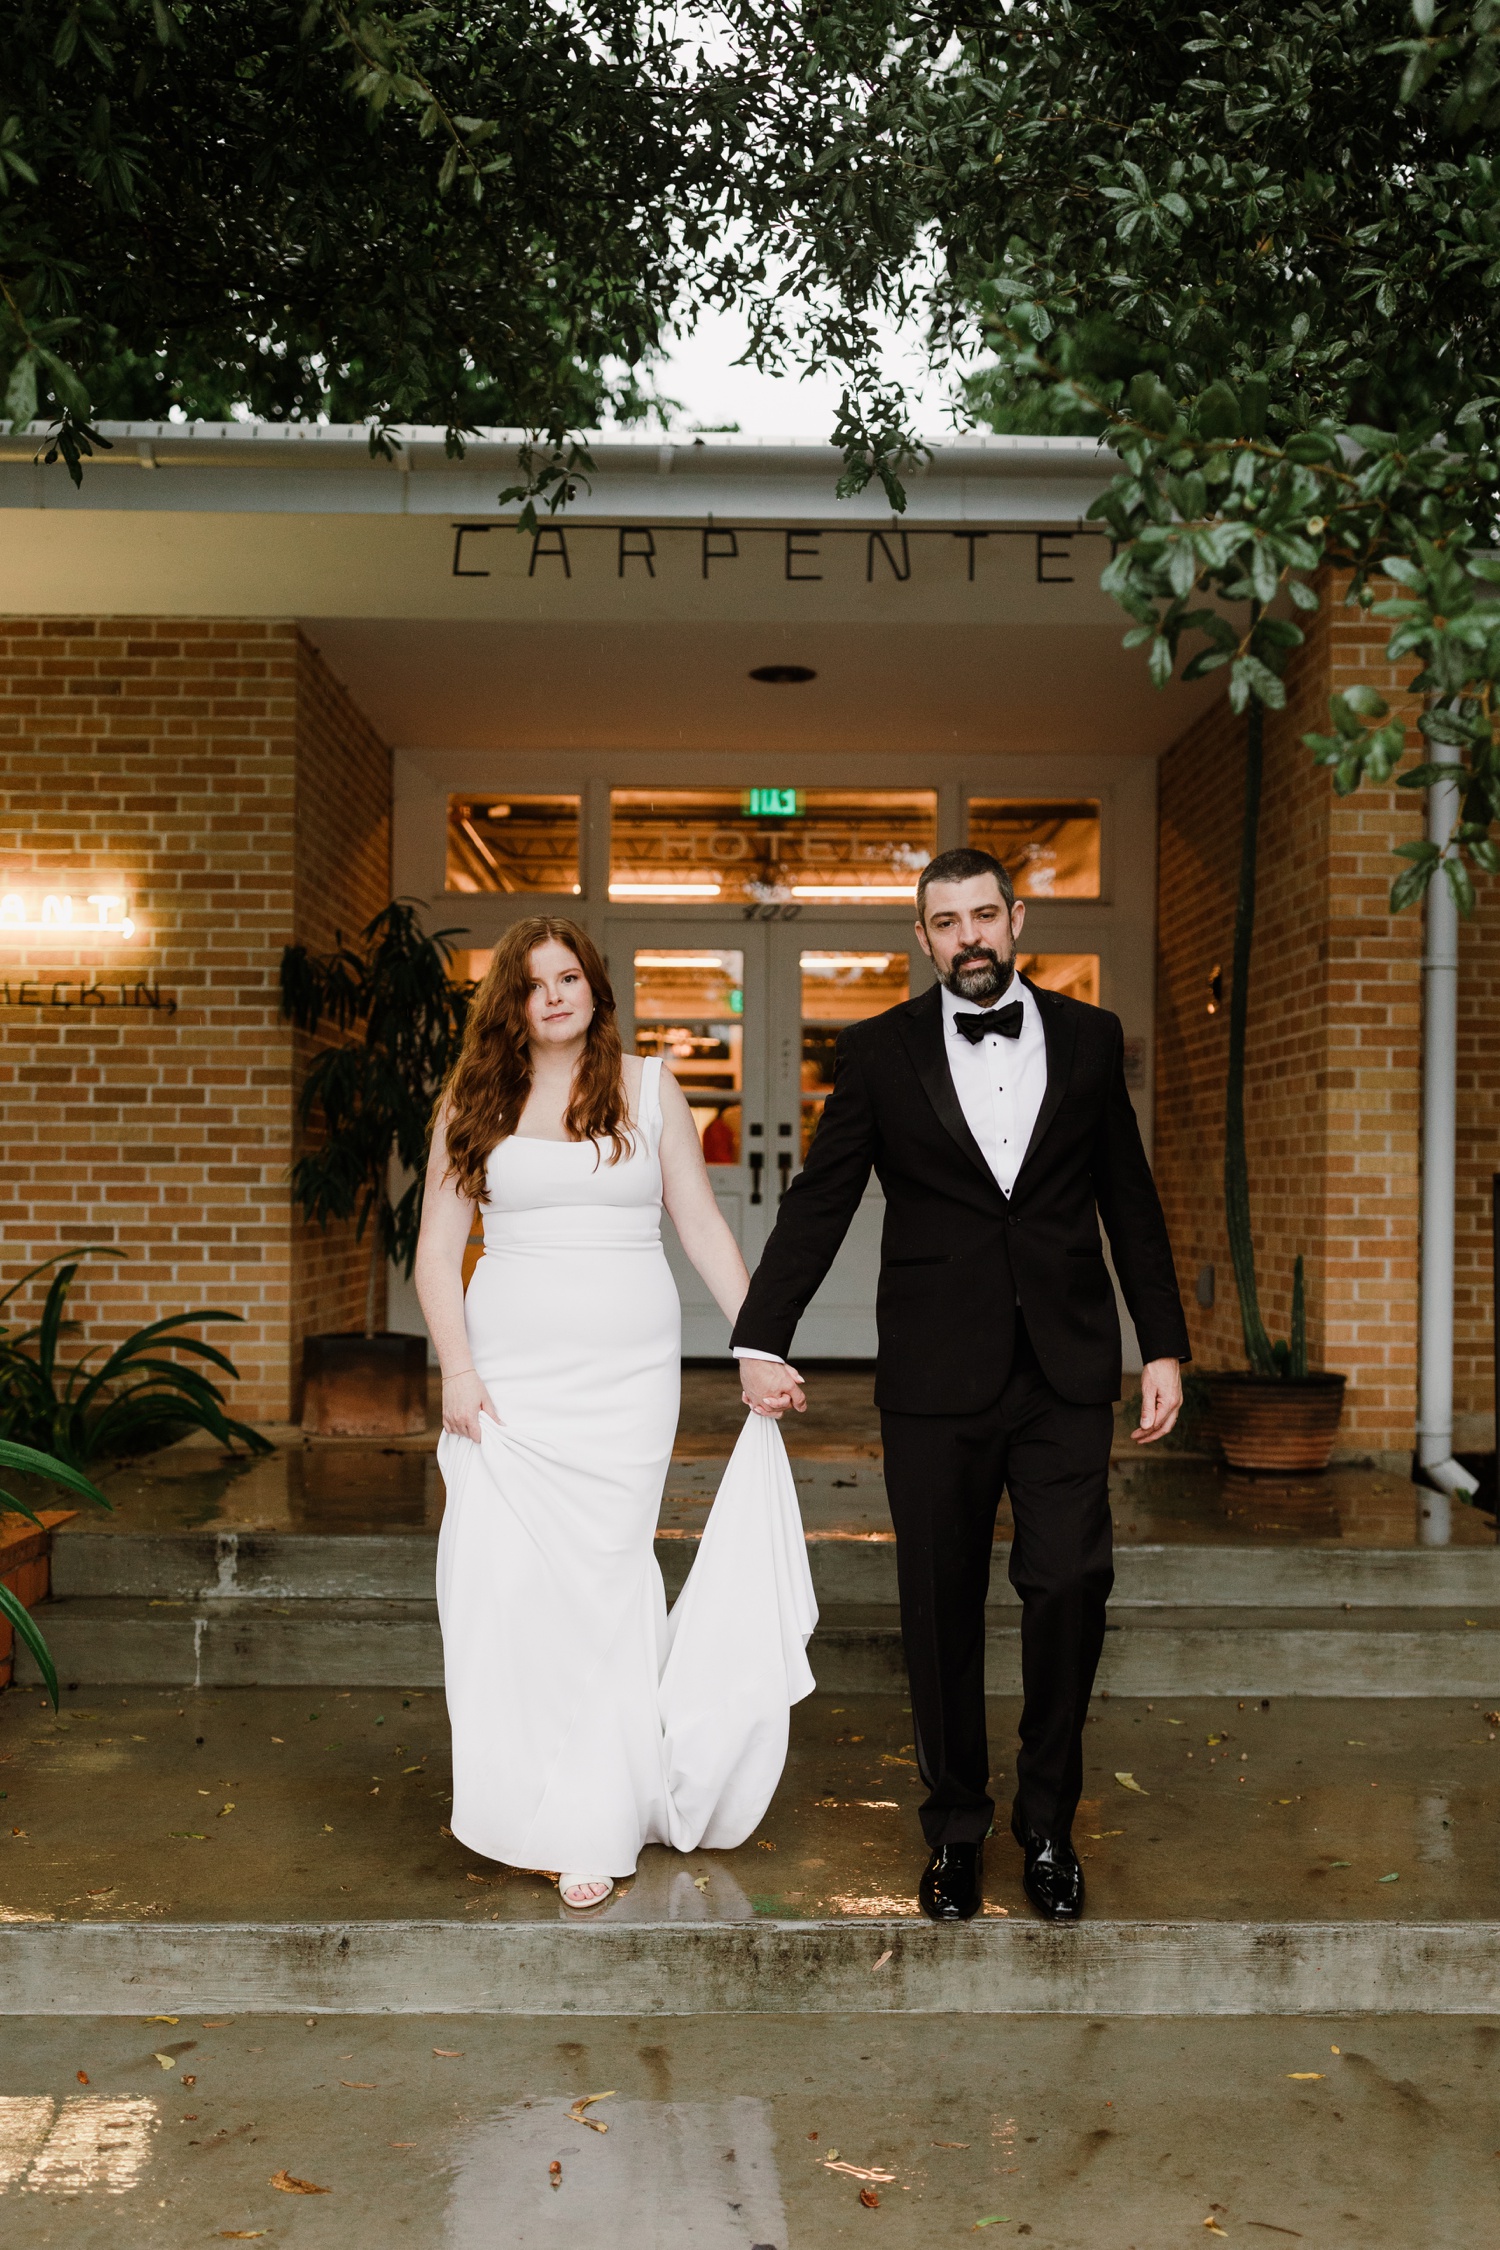 How to find your Austin wedding photographer